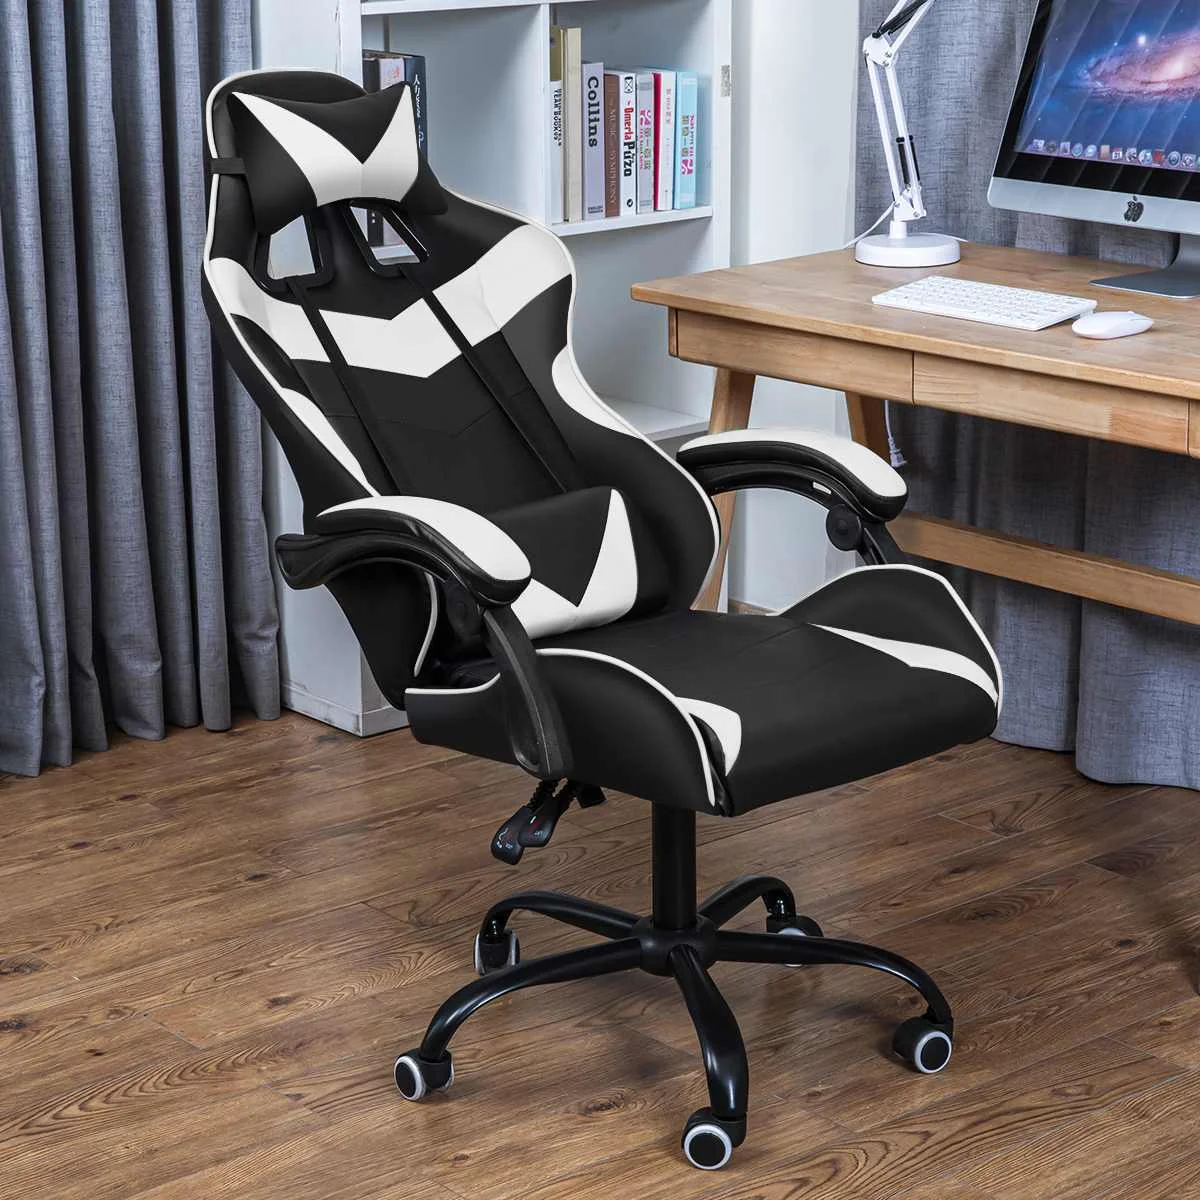 WCG Gaming Chair Computer Armchair Lying Household Lifting Adjustable Desk Chair Home Swivel Office Chair Racing Gamer Chair